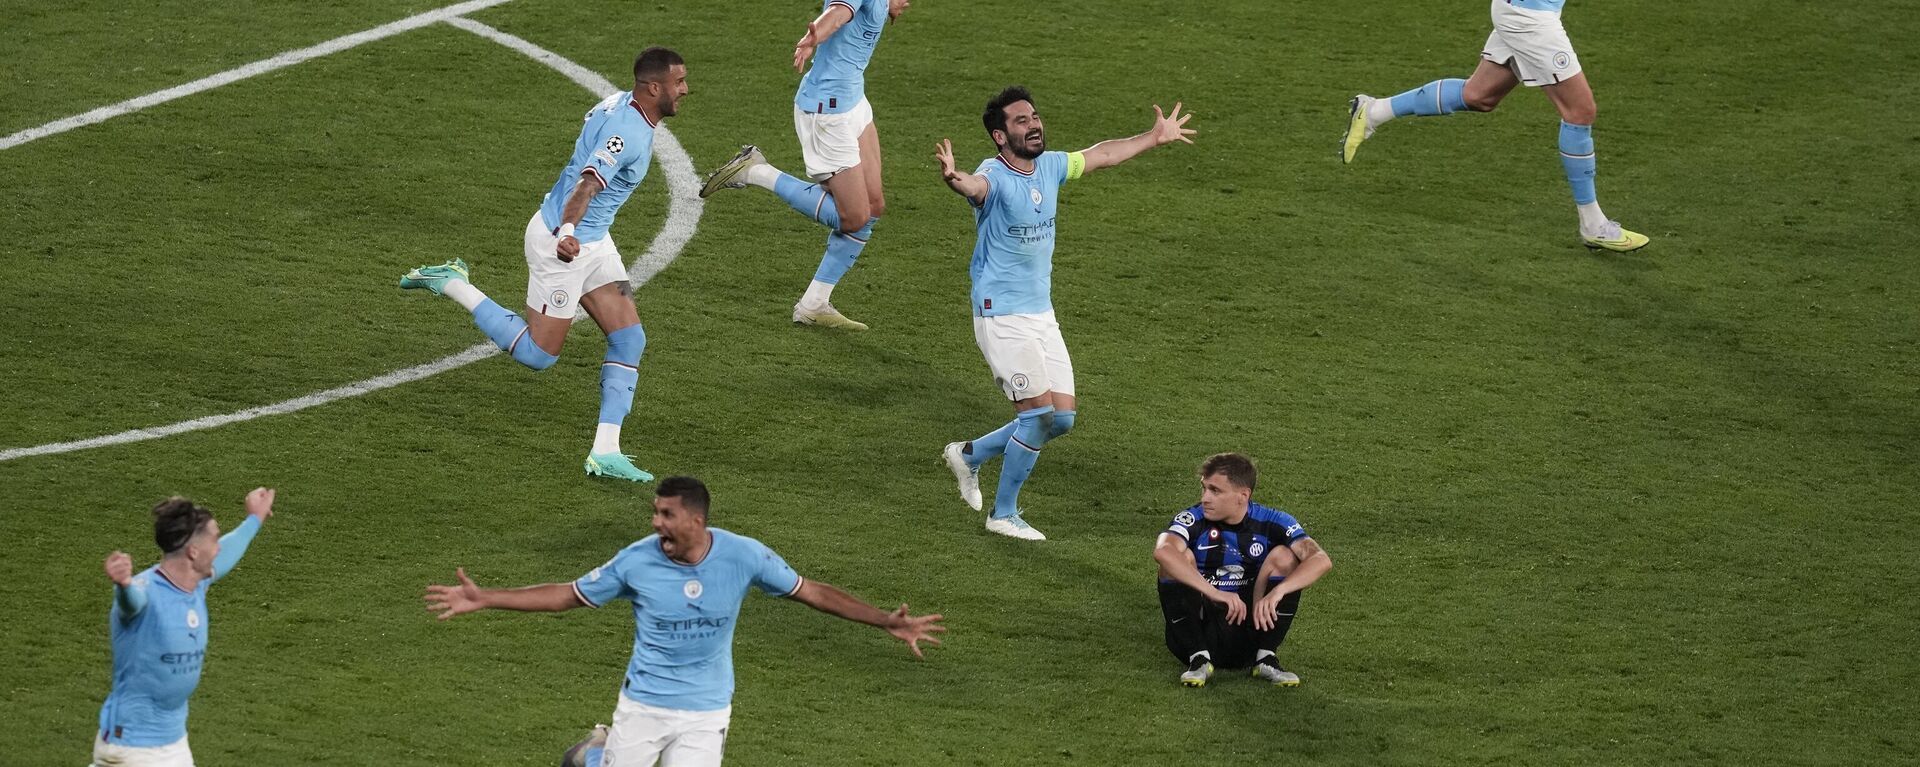 Manchster City players celebrate their 1-0 win at the end of the Champions League final soccer match between Manchester City and Inter Milan at the Ataturk Olympic Stadium in Istanbul, Turkey, Saturday, June 10, 2023.  - Sputnik International, 1920, 10.06.2023